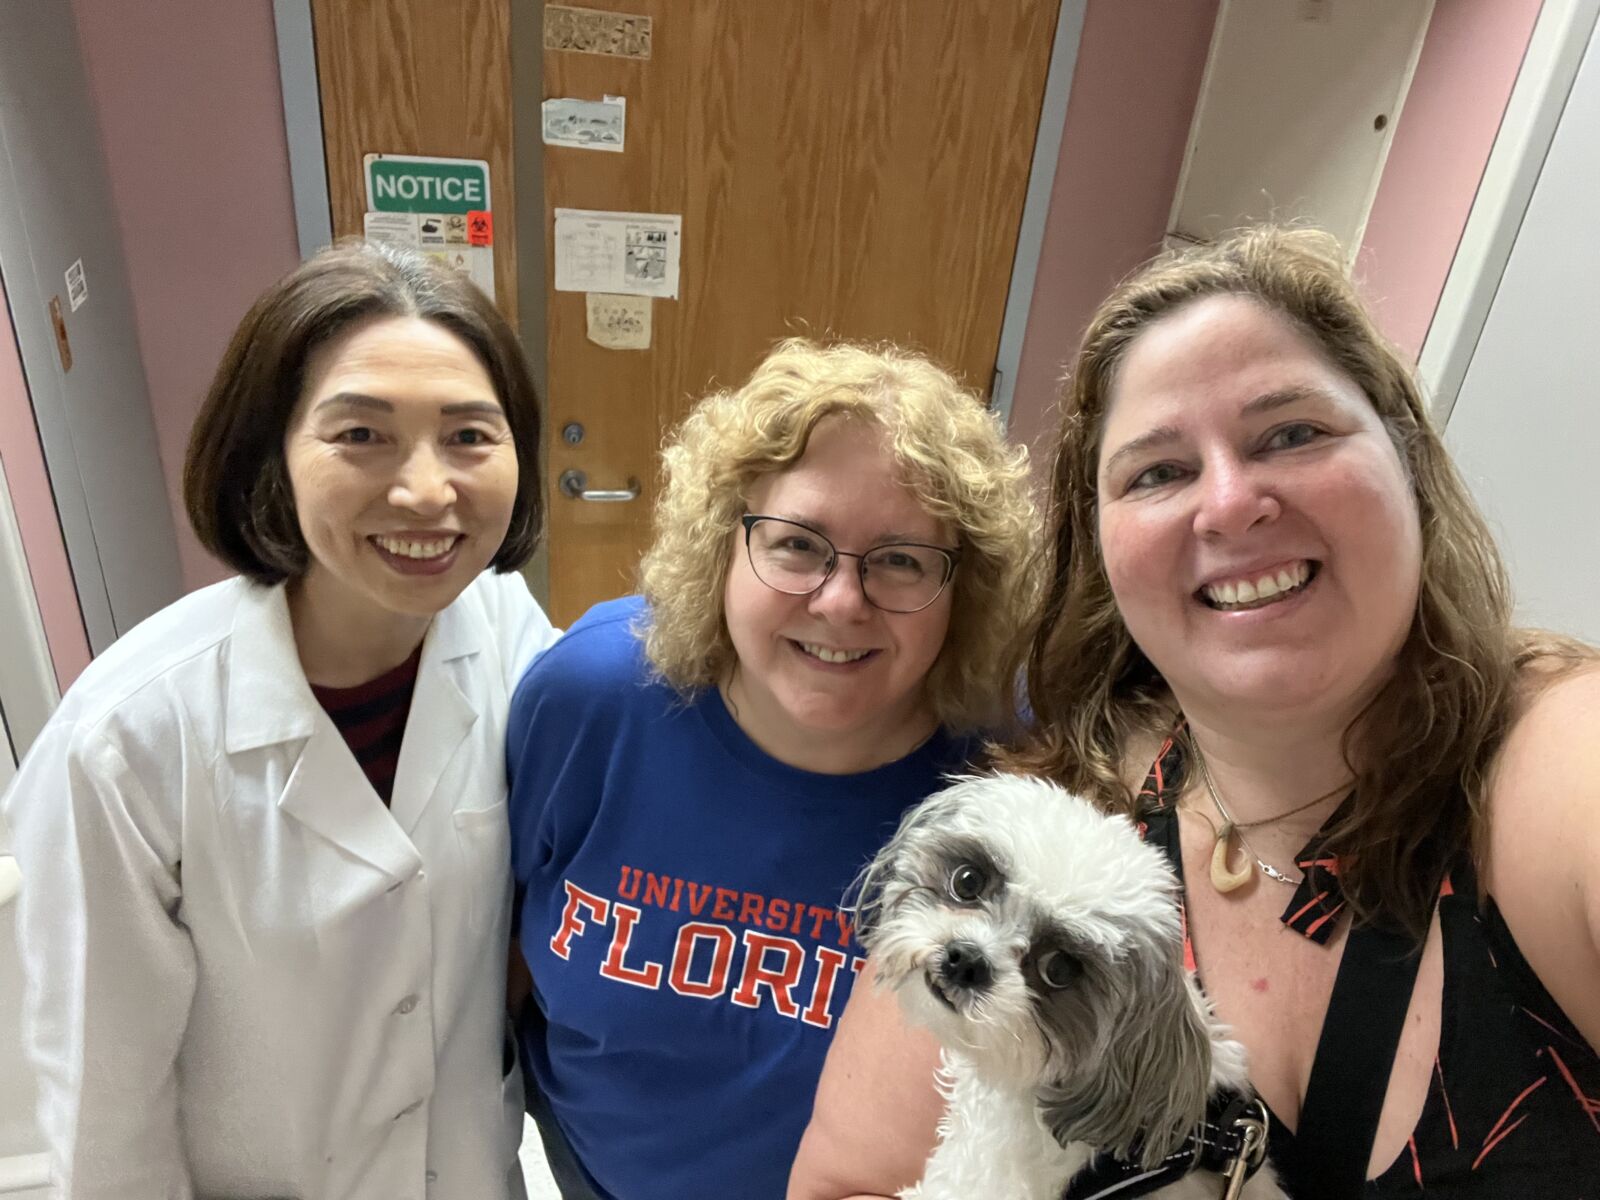 Three women and a small dog pose for a photo inside a room with a wooden door in the background. One woman wears a white lab coat, another has a University of Florida shirt, and the third holds the dog.